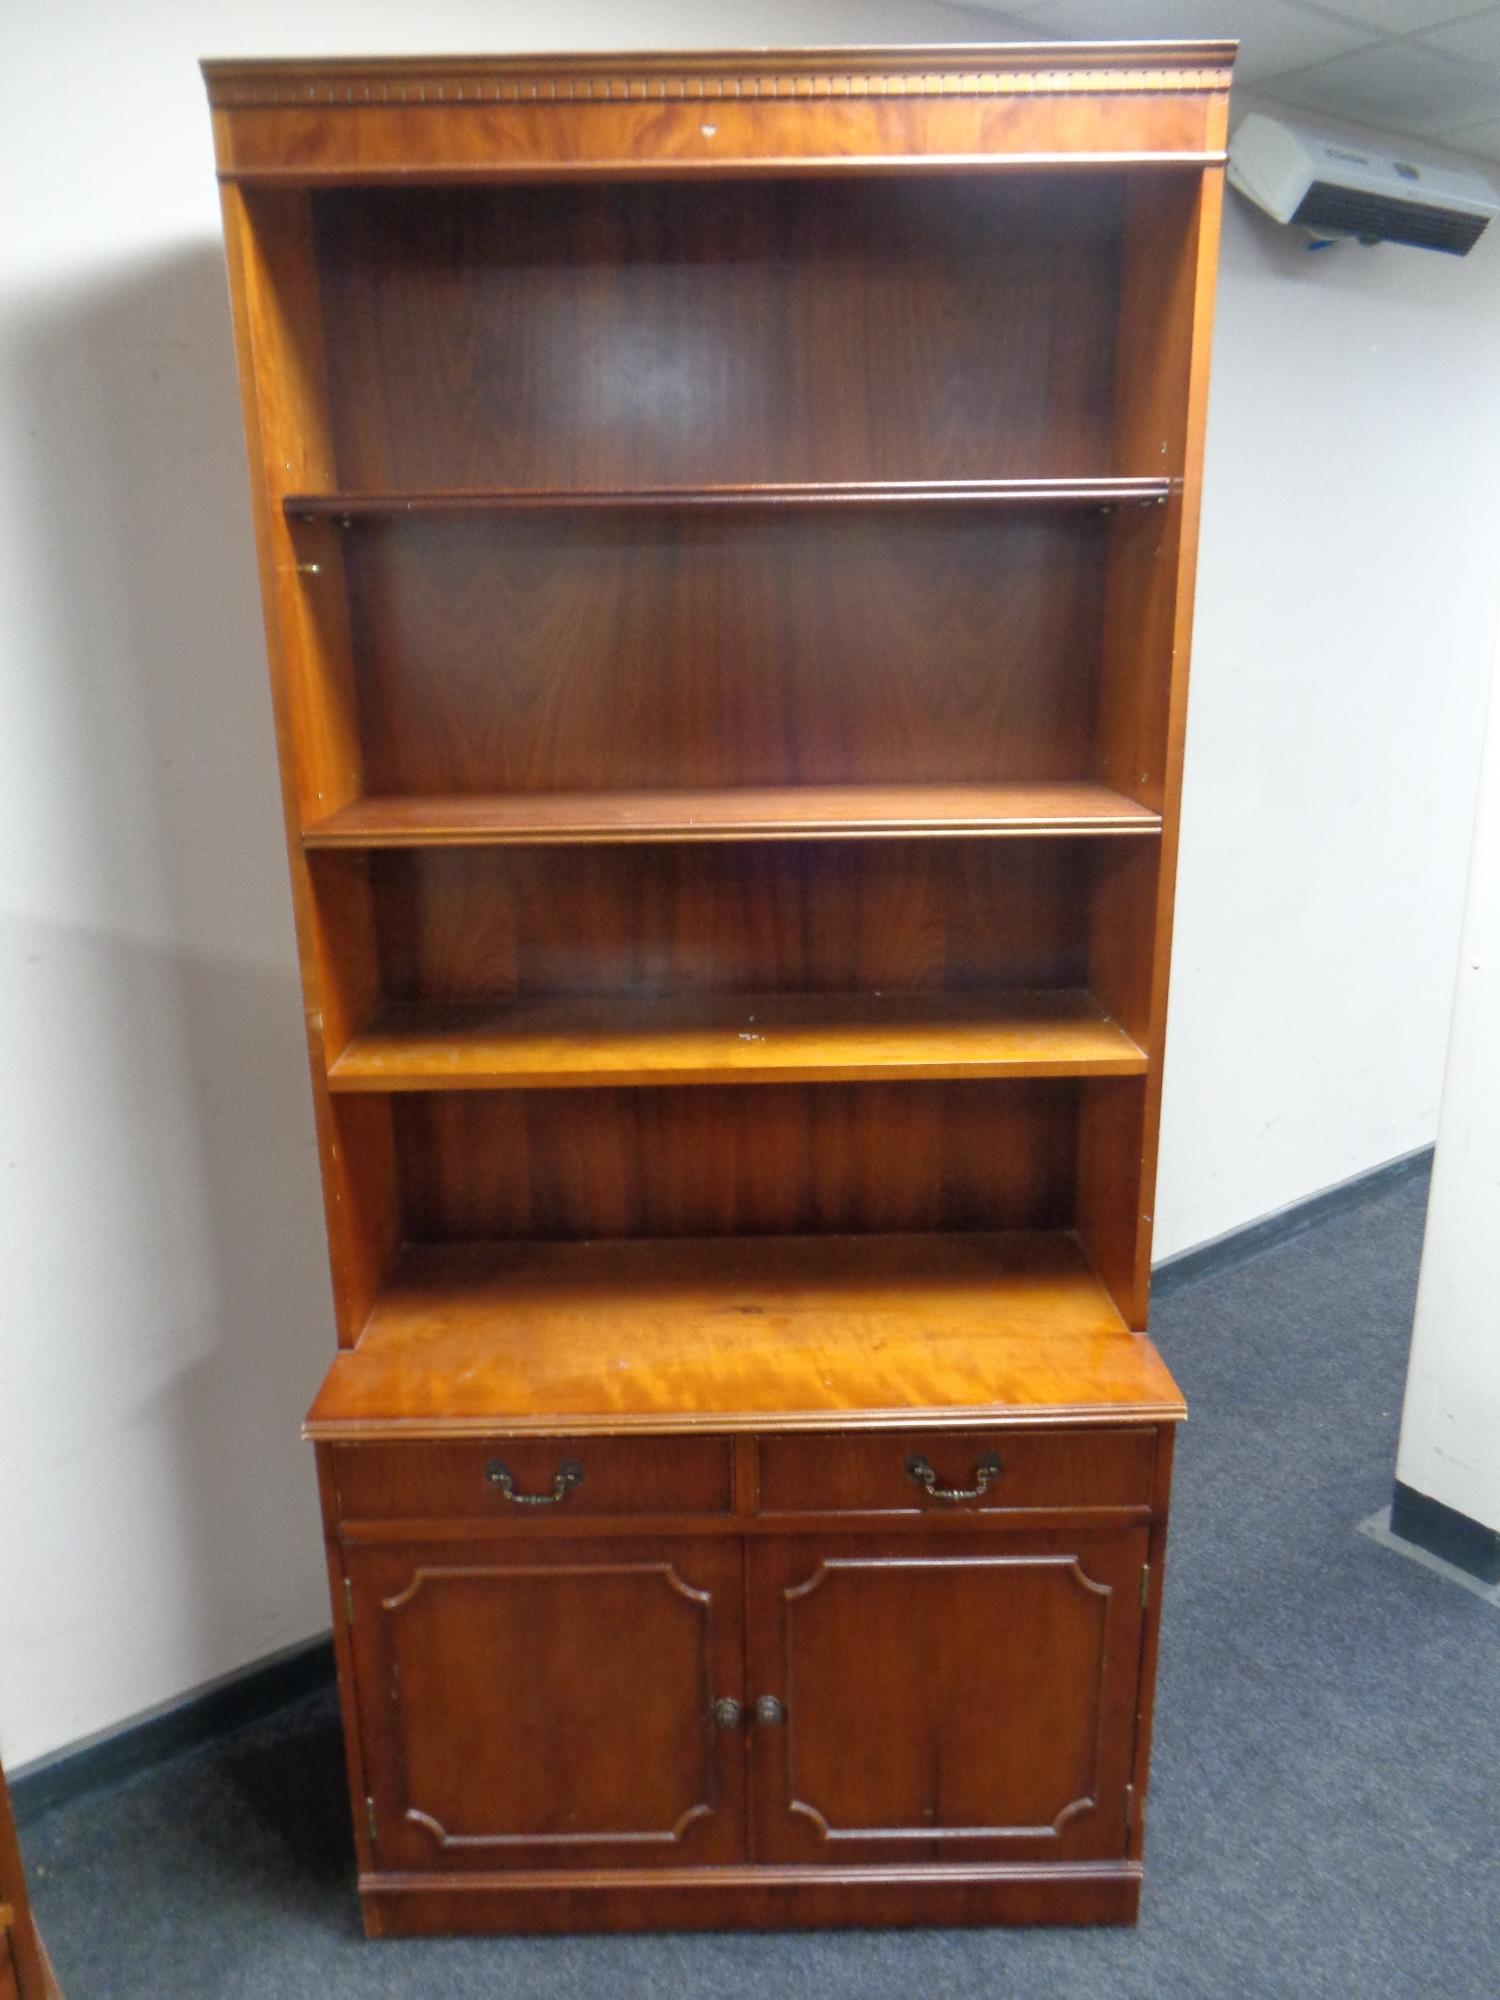 A reproduction yew wood open bookcase